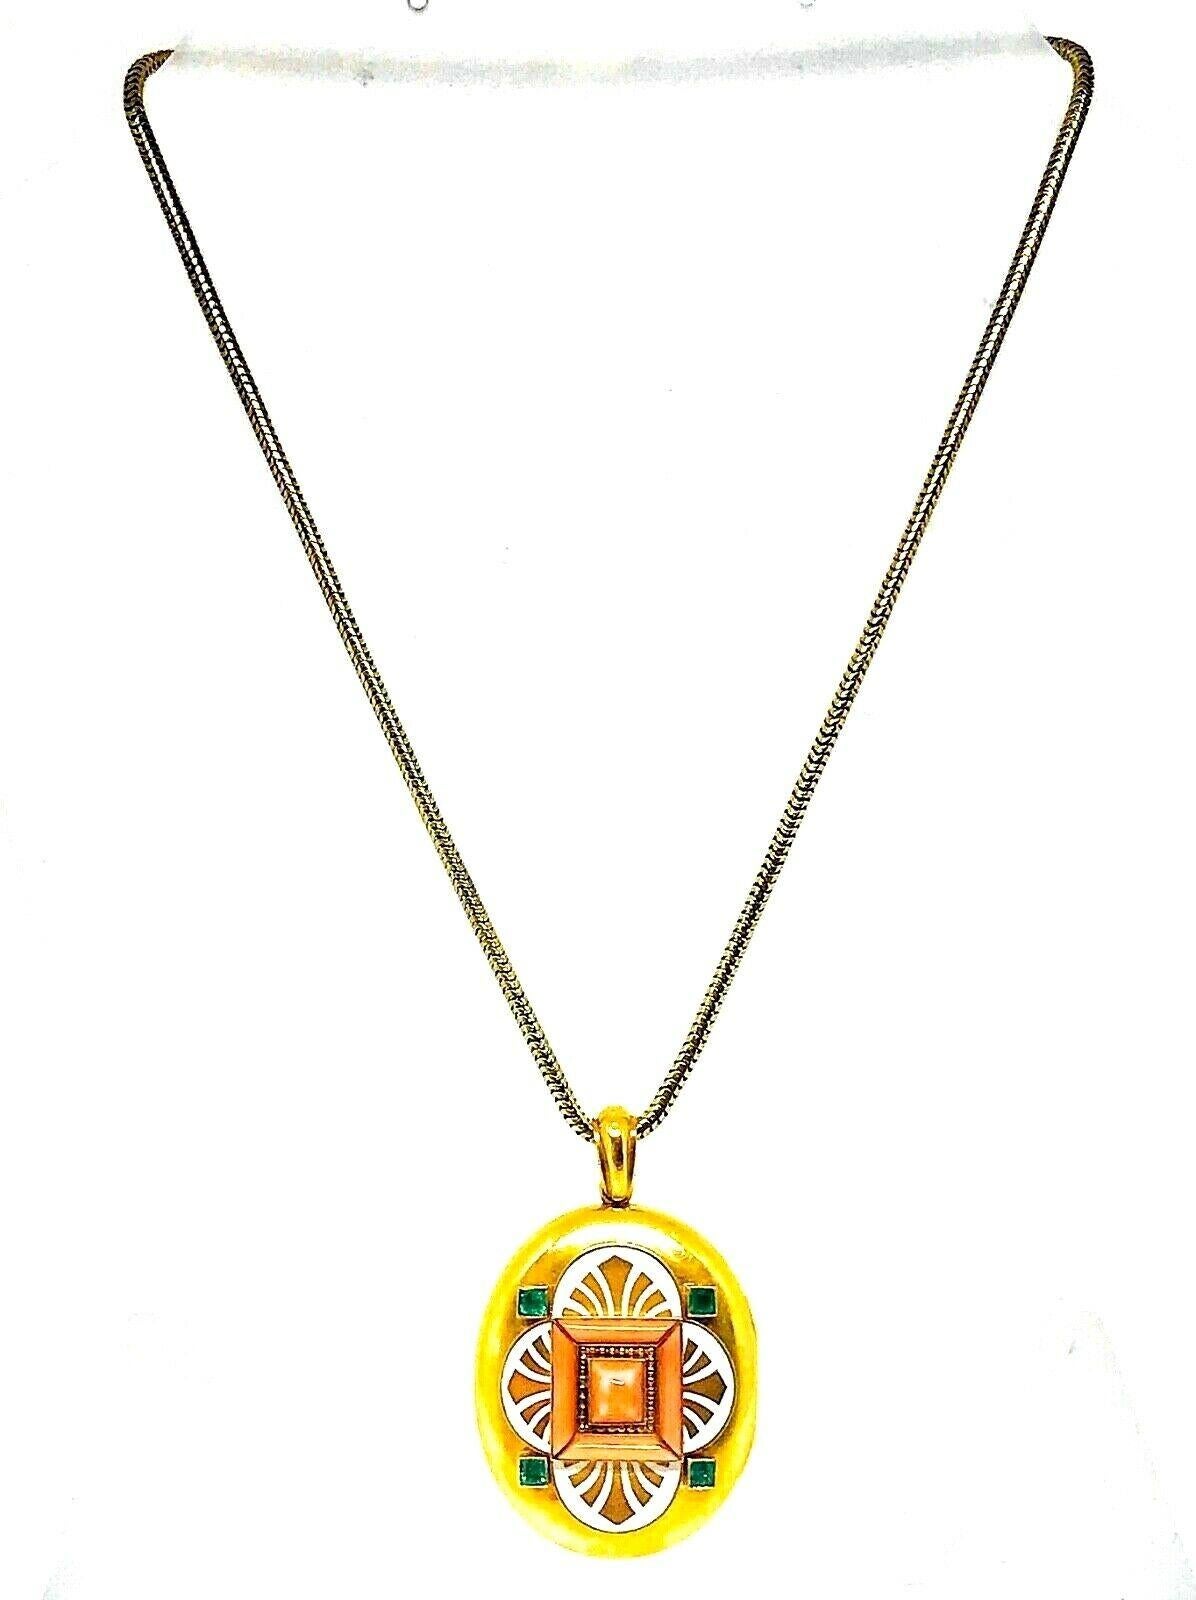 Victorian Yellow Gold Emerald Coral Enamel Locket Pendant Chain Necklace For Sale 3